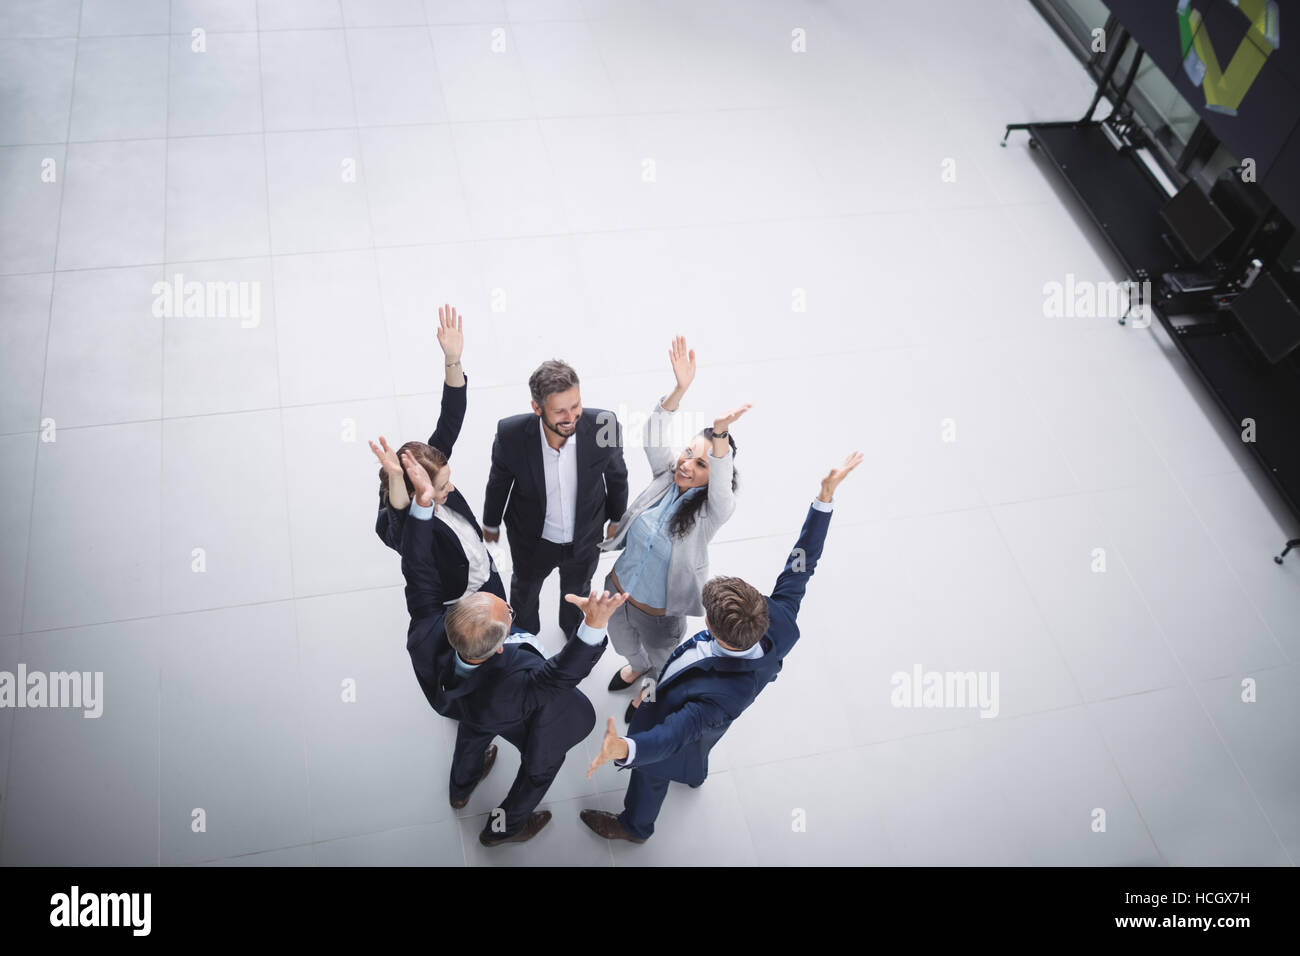 Businesspeople standing with hands raised Stock Photo